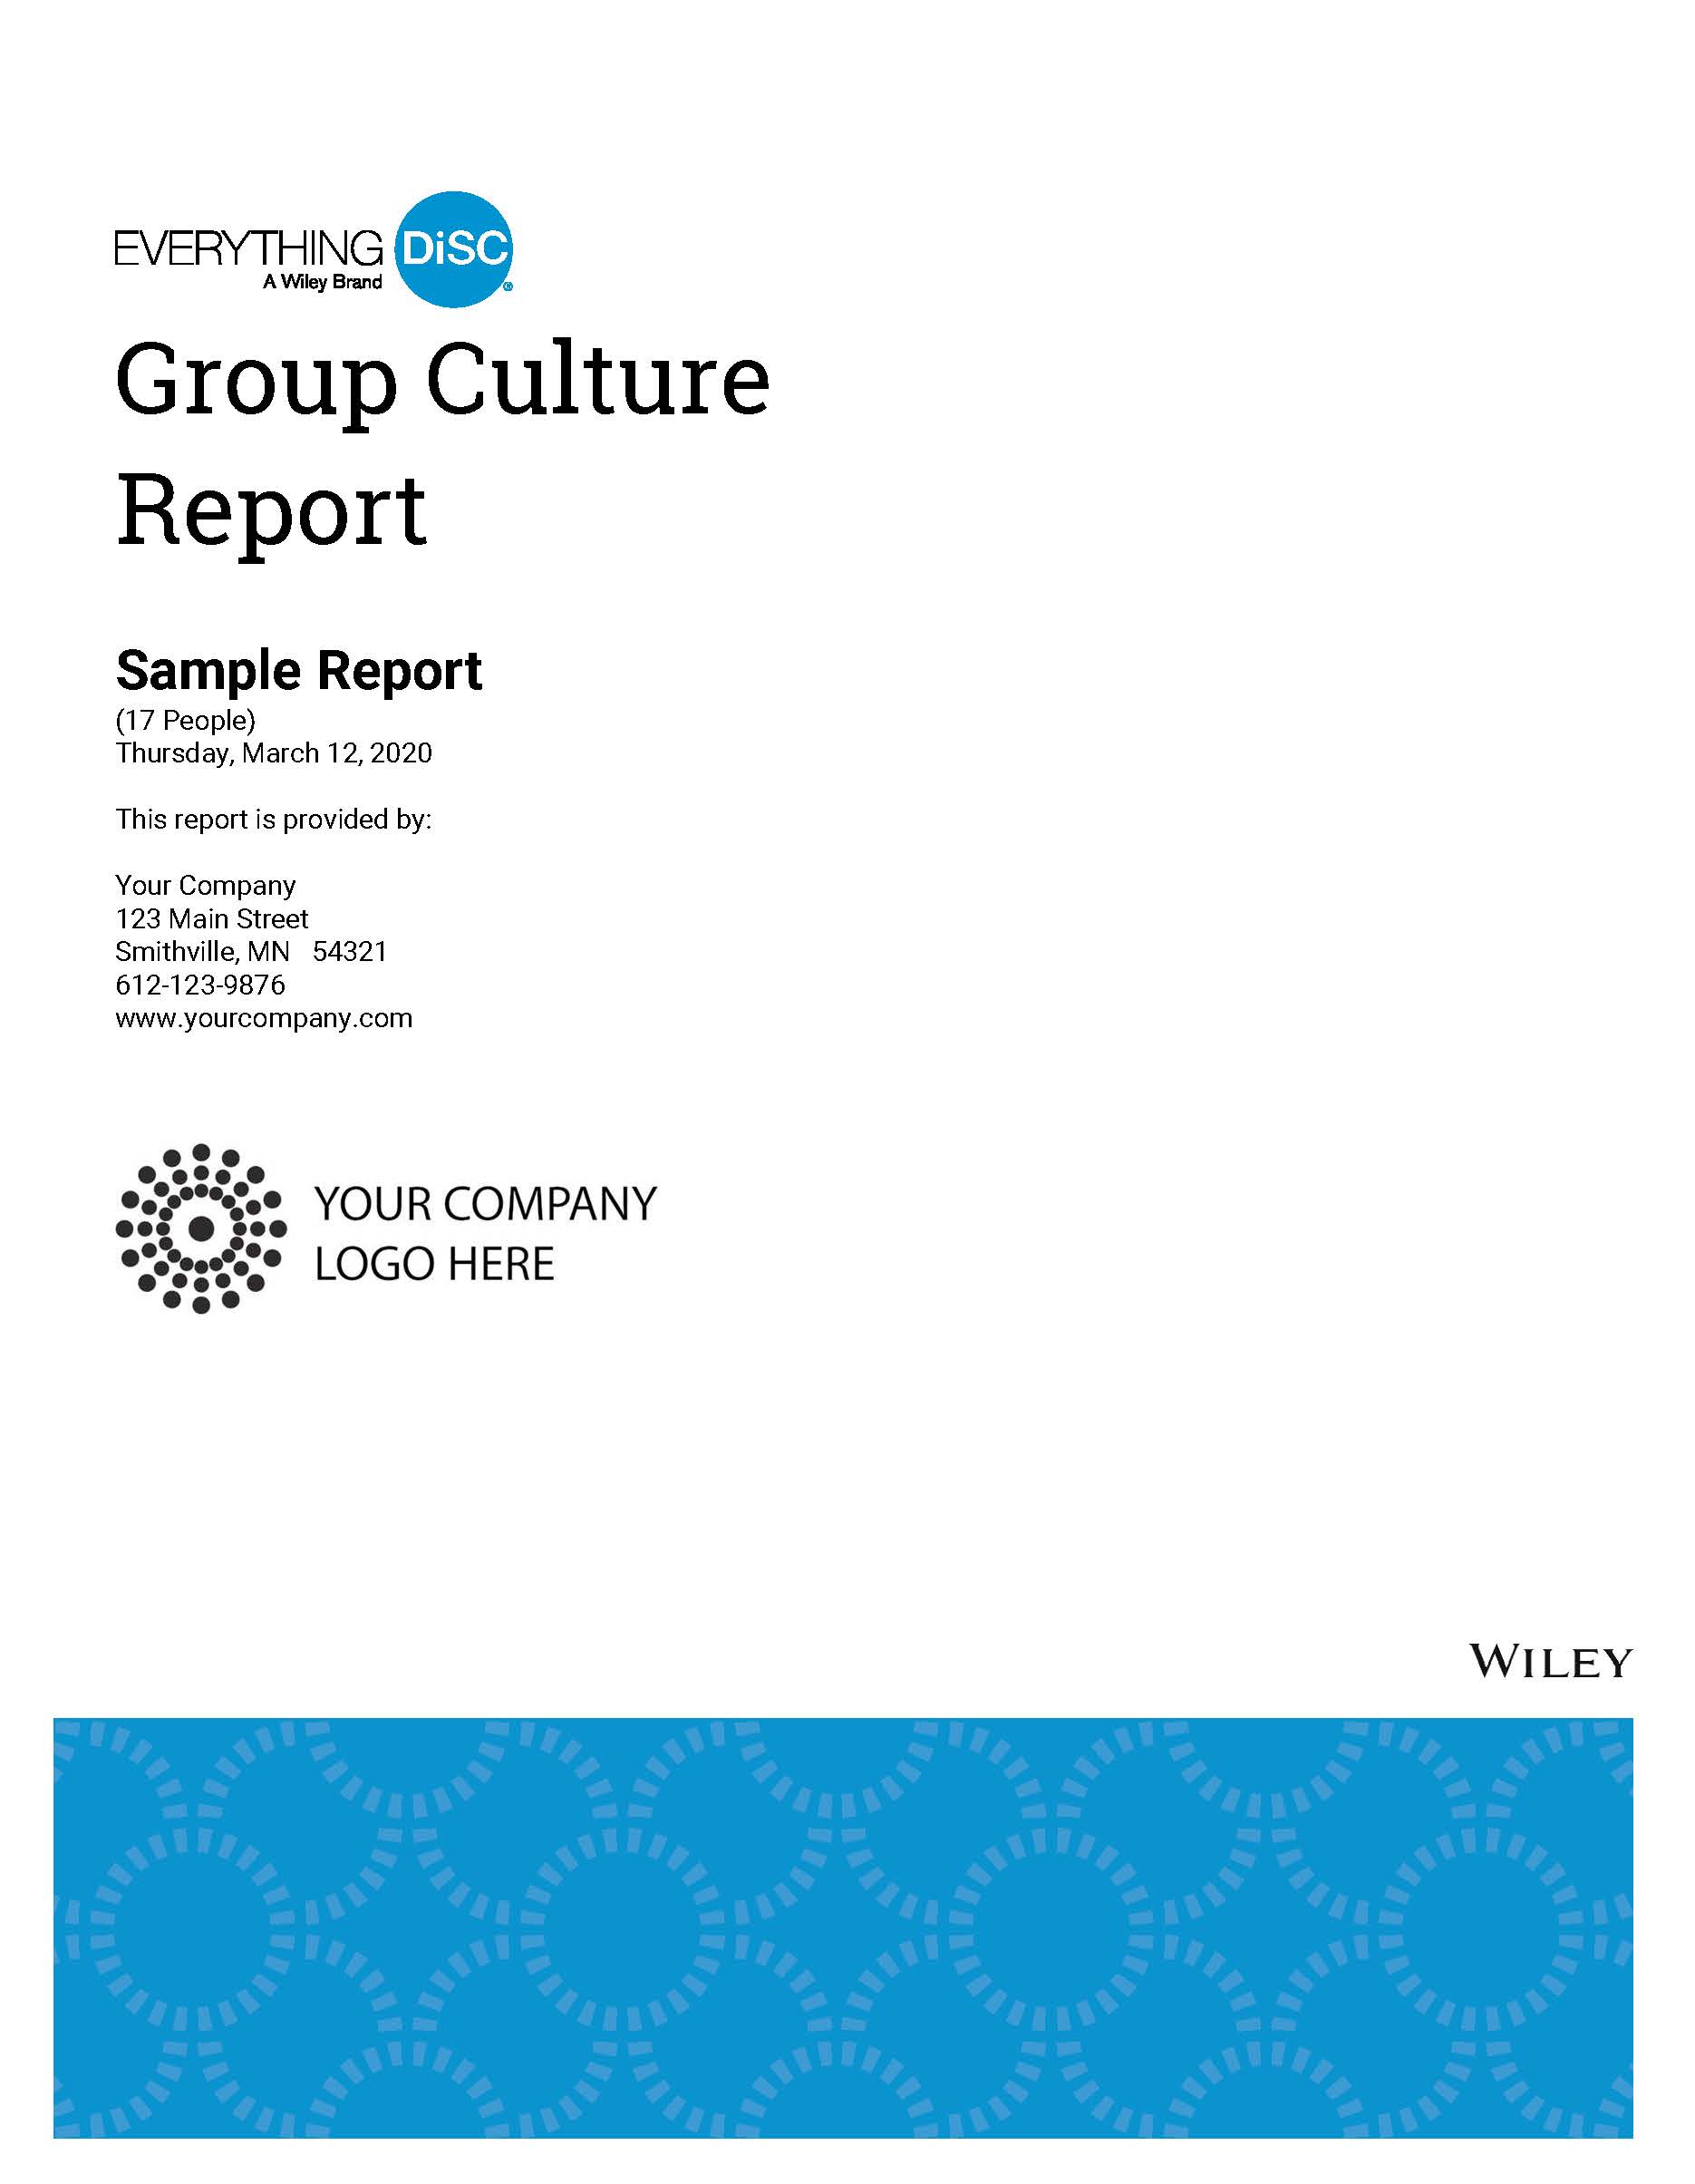 Everything DiSC Group Culture Report Cover May 2020